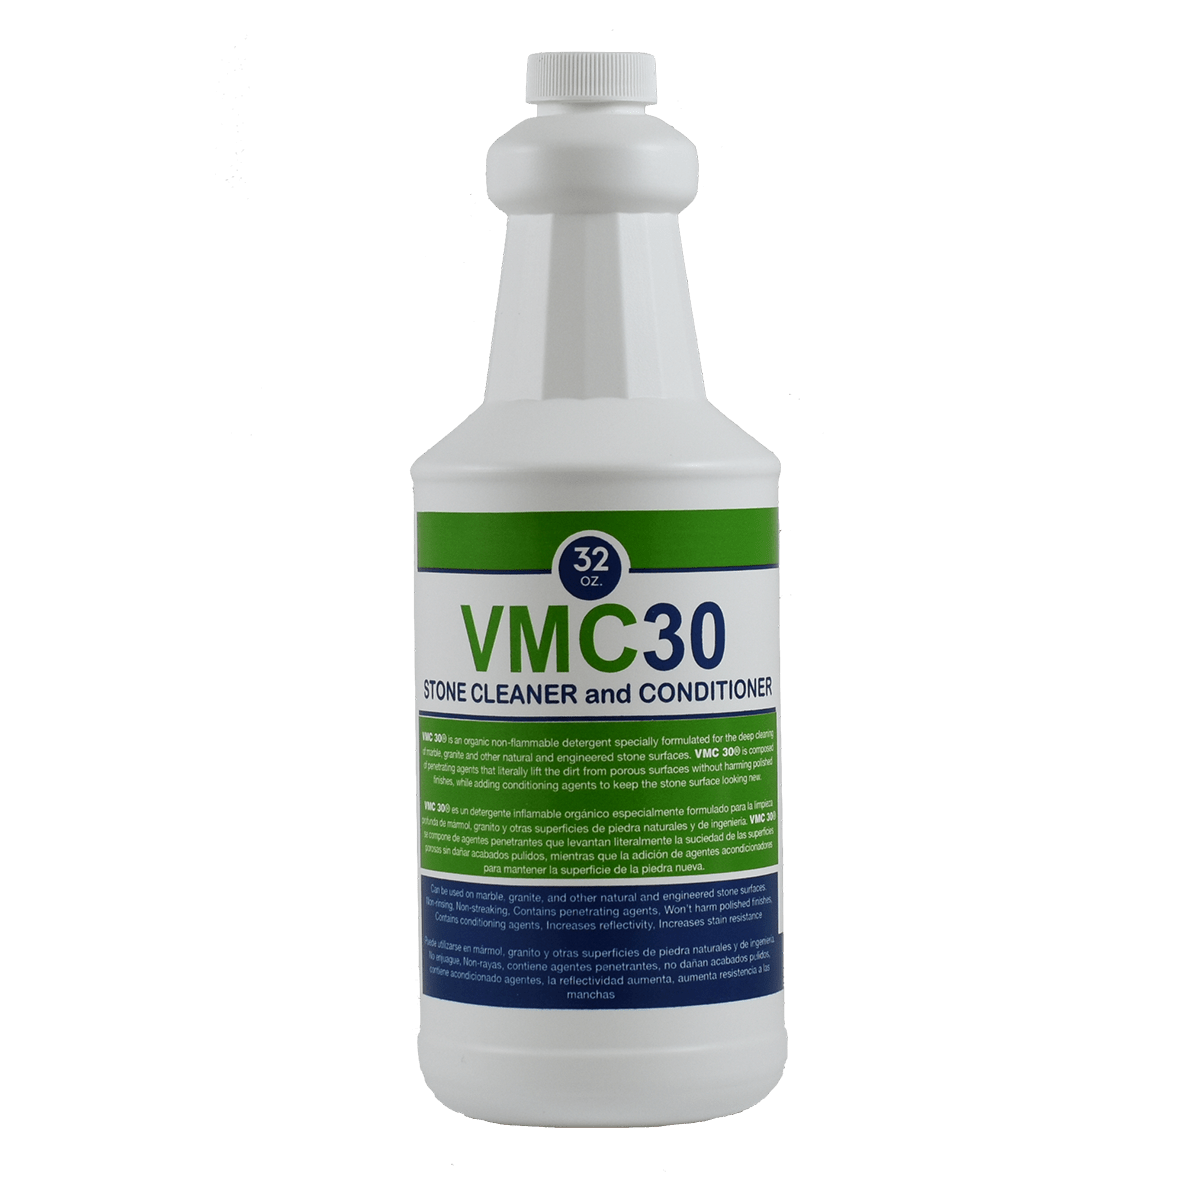 VMC30 Stone Cleaner and Conditioner - VMC